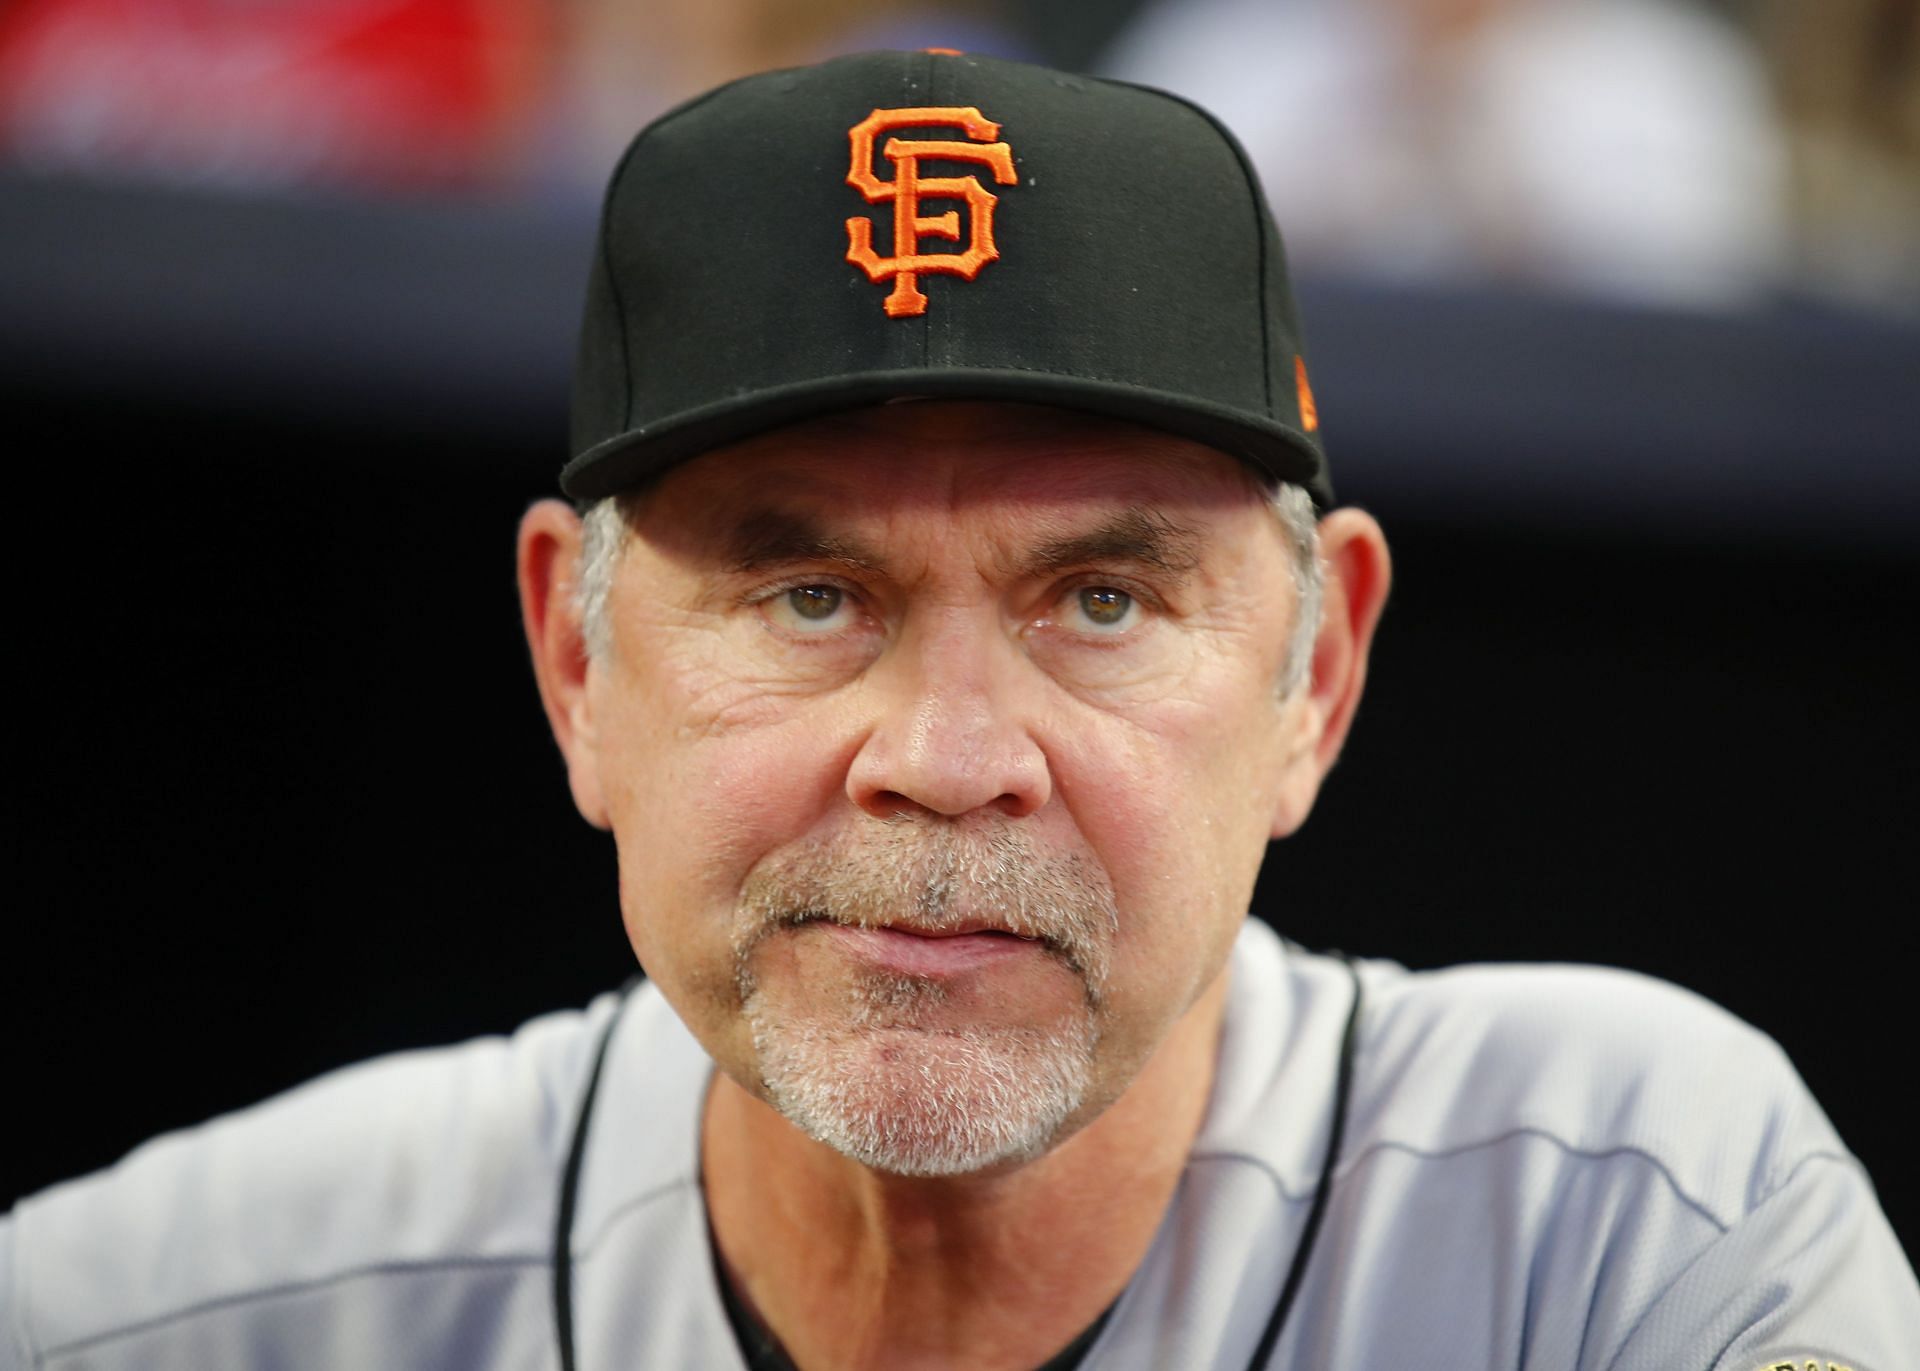 This week in SF Giants baseball: Shohei Ohtani, Bruce Bochy and a